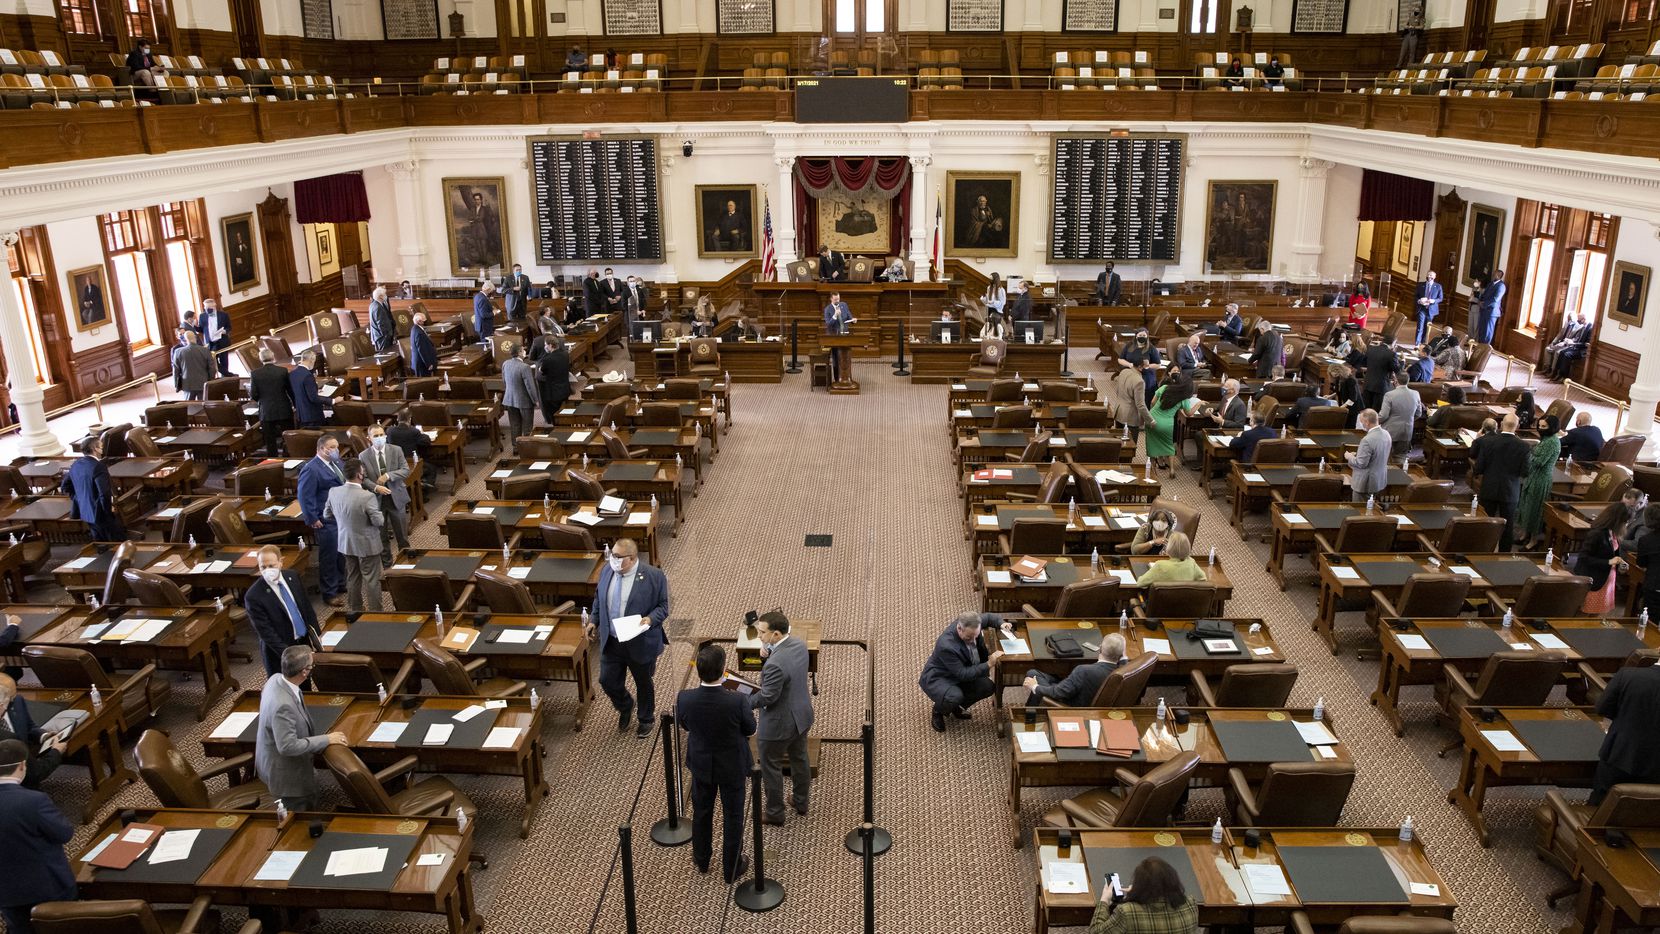 Democrats on Thursday urged Texas' Republican leaders to quickly distribute federal COVID...